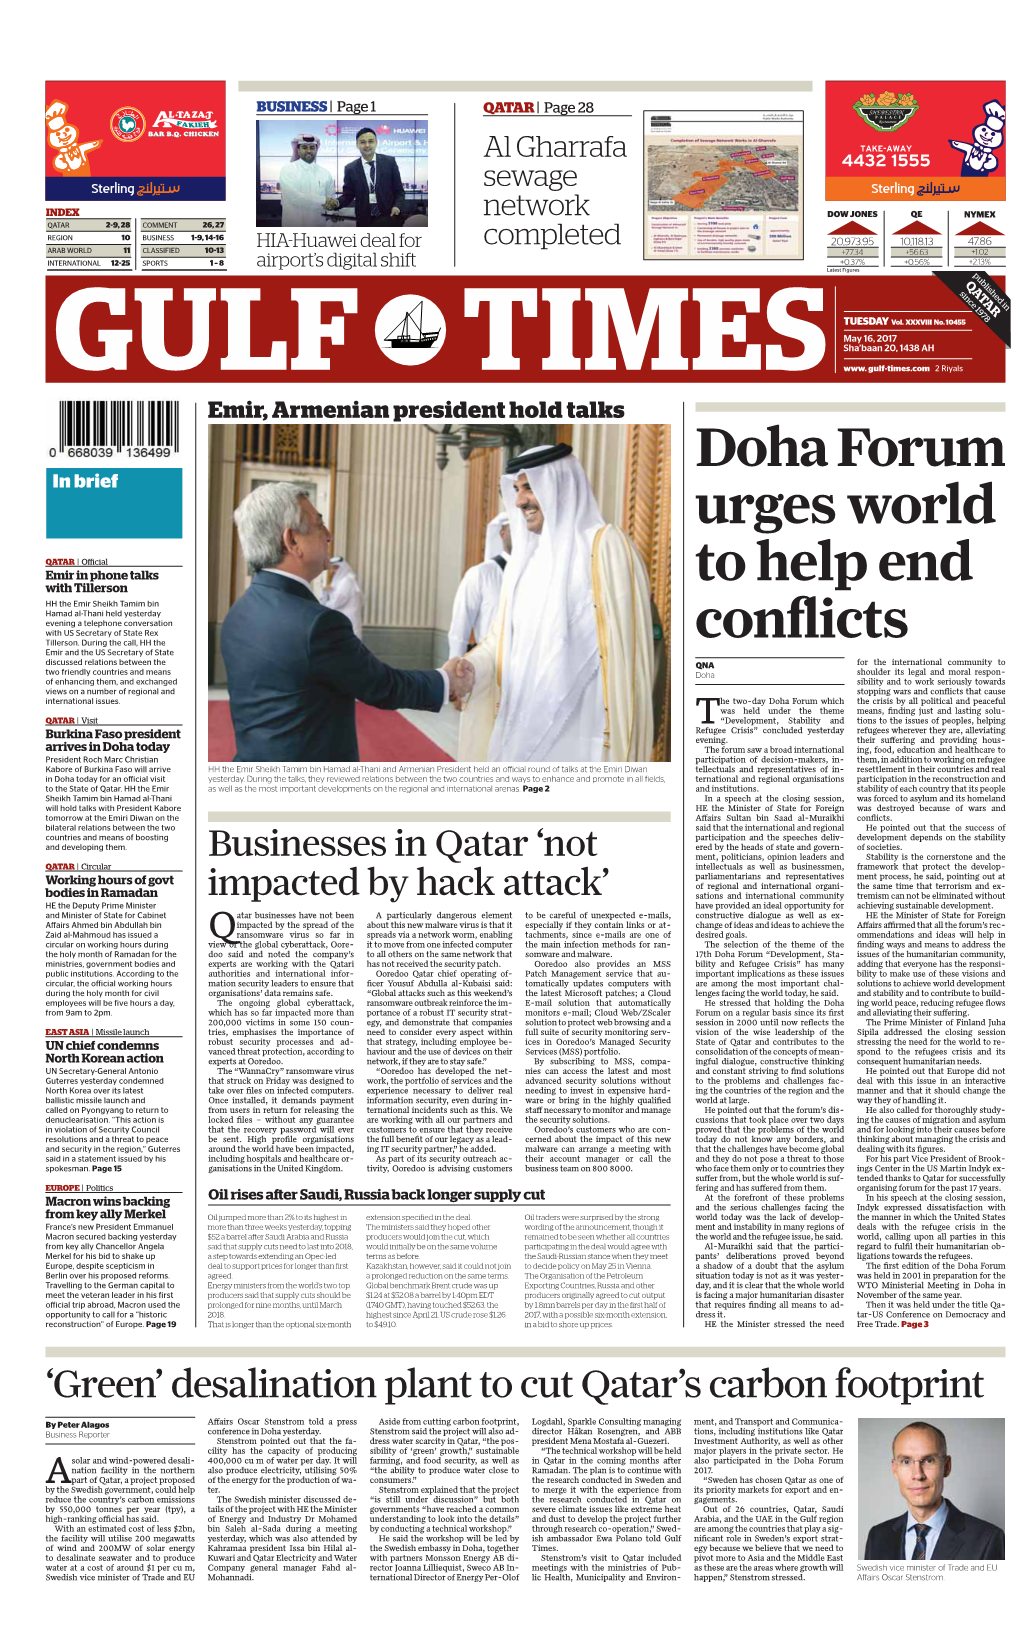 Doha Forum Urges World to Help End Conflicts